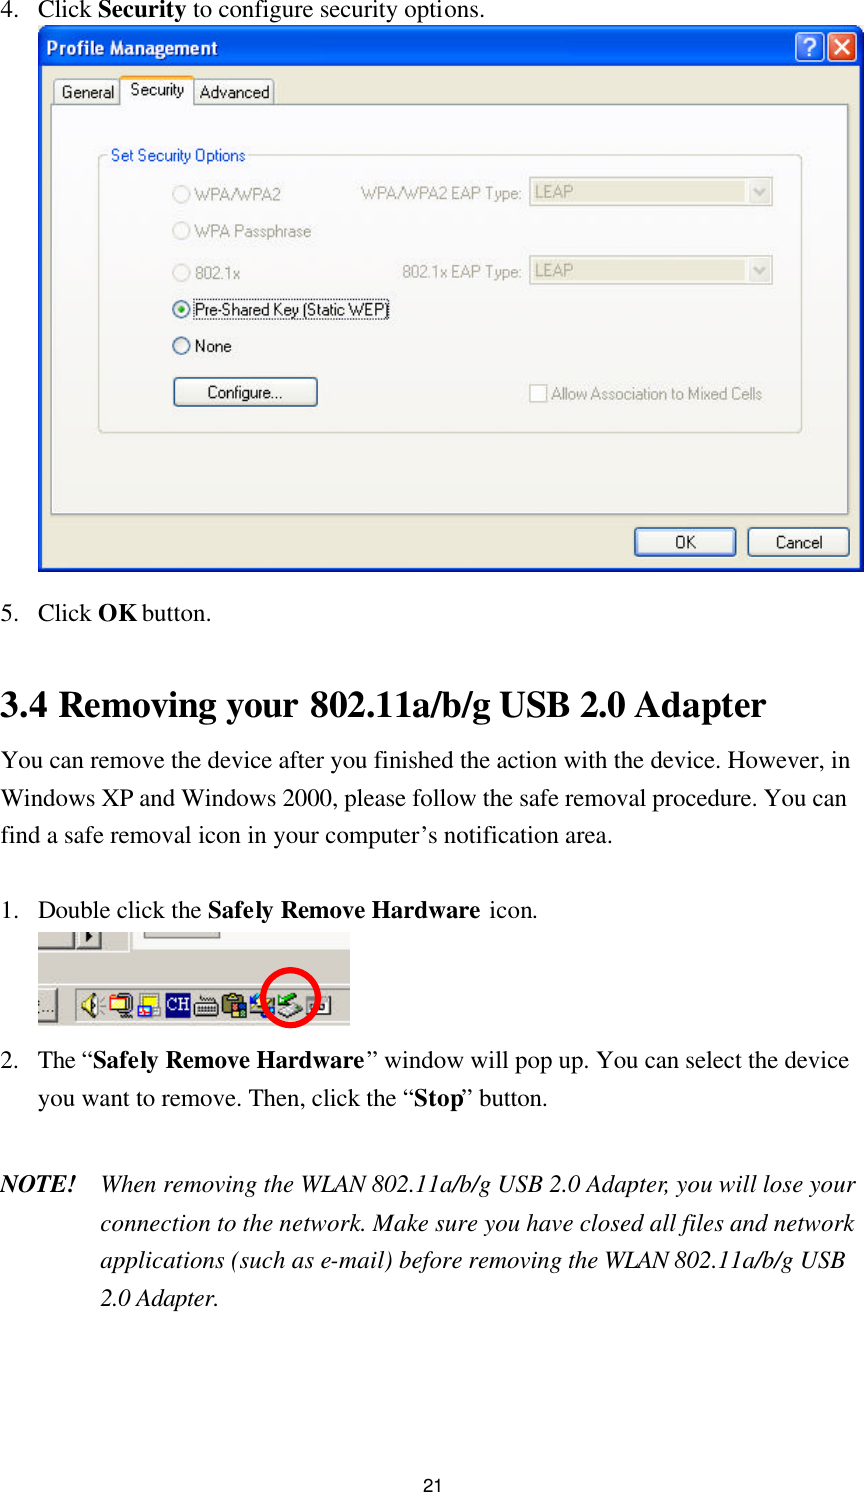 21 4. Click Security to configure security options.   5. Click OK button.  3.4 Removing your 802.11a/b/g USB 2.0 Adapter   You can remove the device after you finished the action with the device. However, in Windows XP and Windows 2000, please follow the safe removal procedure. You can find a safe removal icon in your computer’s notification area.    1. Double click the Safely Remove Hardware icon.  2. The “Safely Remove Hardware” window will pop up. You can select the device you want to remove. Then, click the “Stop” button.  NOTE! When removing the WLAN 802.11a/b/g USB 2.0 Adapter, you will lose your connection to the network. Make sure you have closed all files and network applications (such as e-mail) before removing the WLAN 802.11a/b/g USB 2.0 Adapter.  